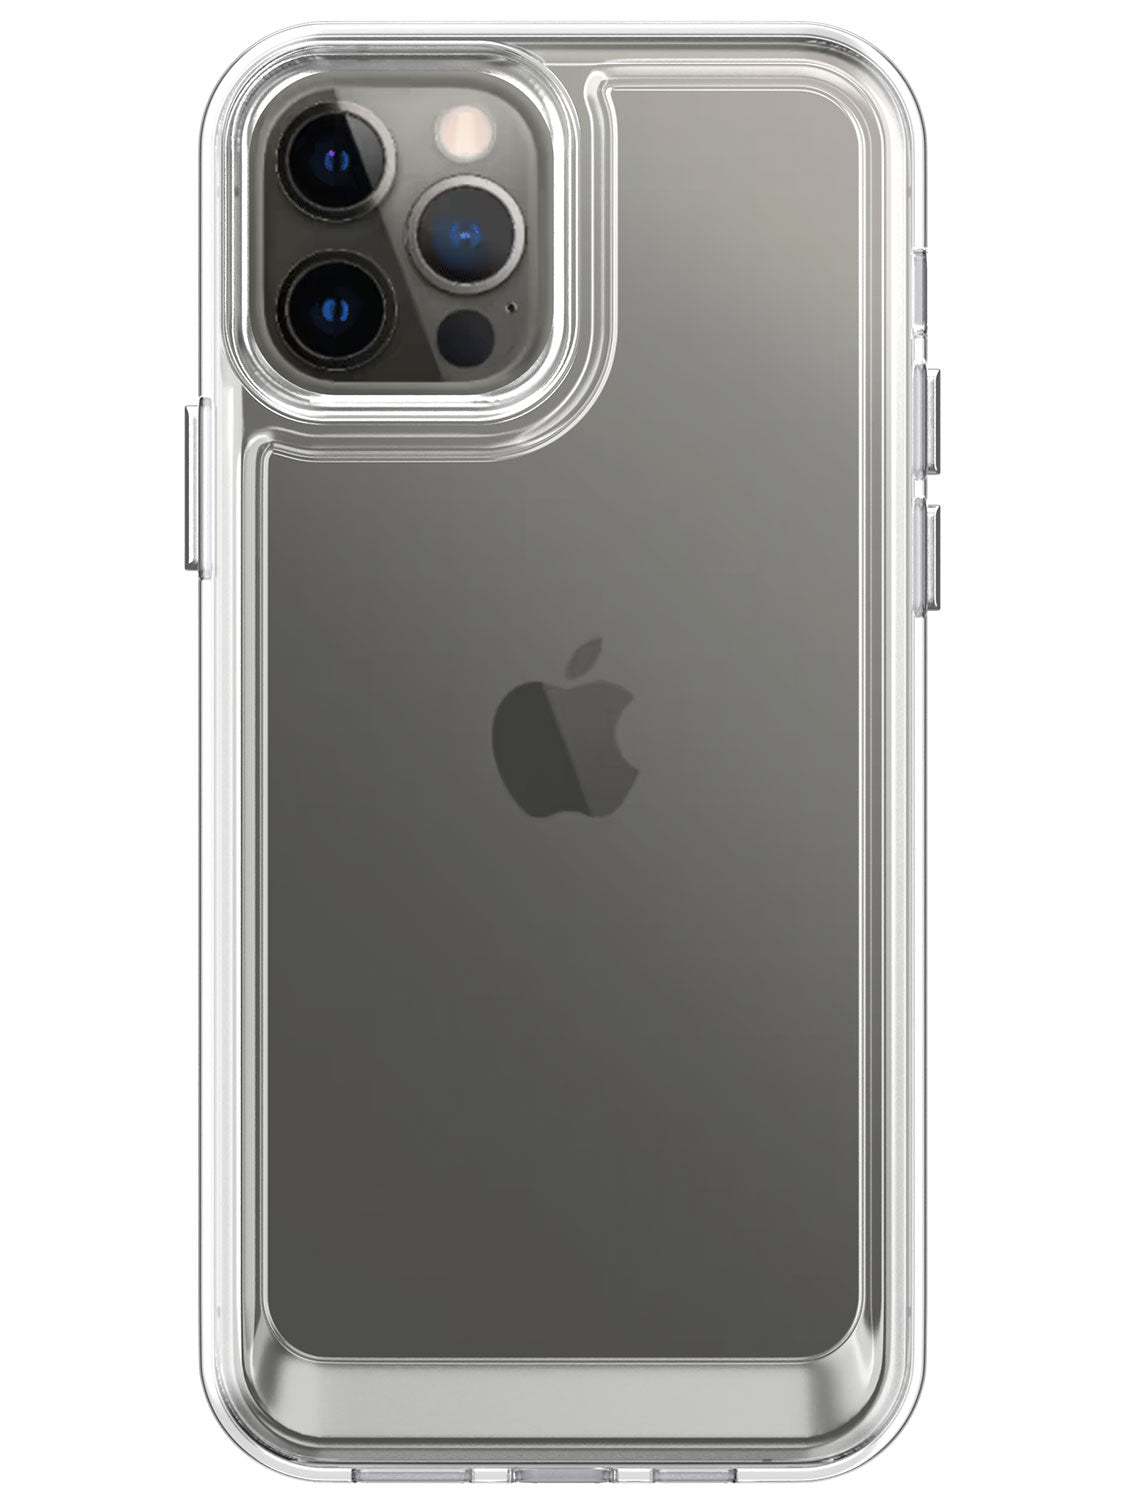 iPhone 12 Pro Max case with camera protection , iPhone 12 Pro Max cover with camera protection , iPhone 12 Pro Max case cover with camera protection , iPhone 12 Pro Max back cover with camera protection